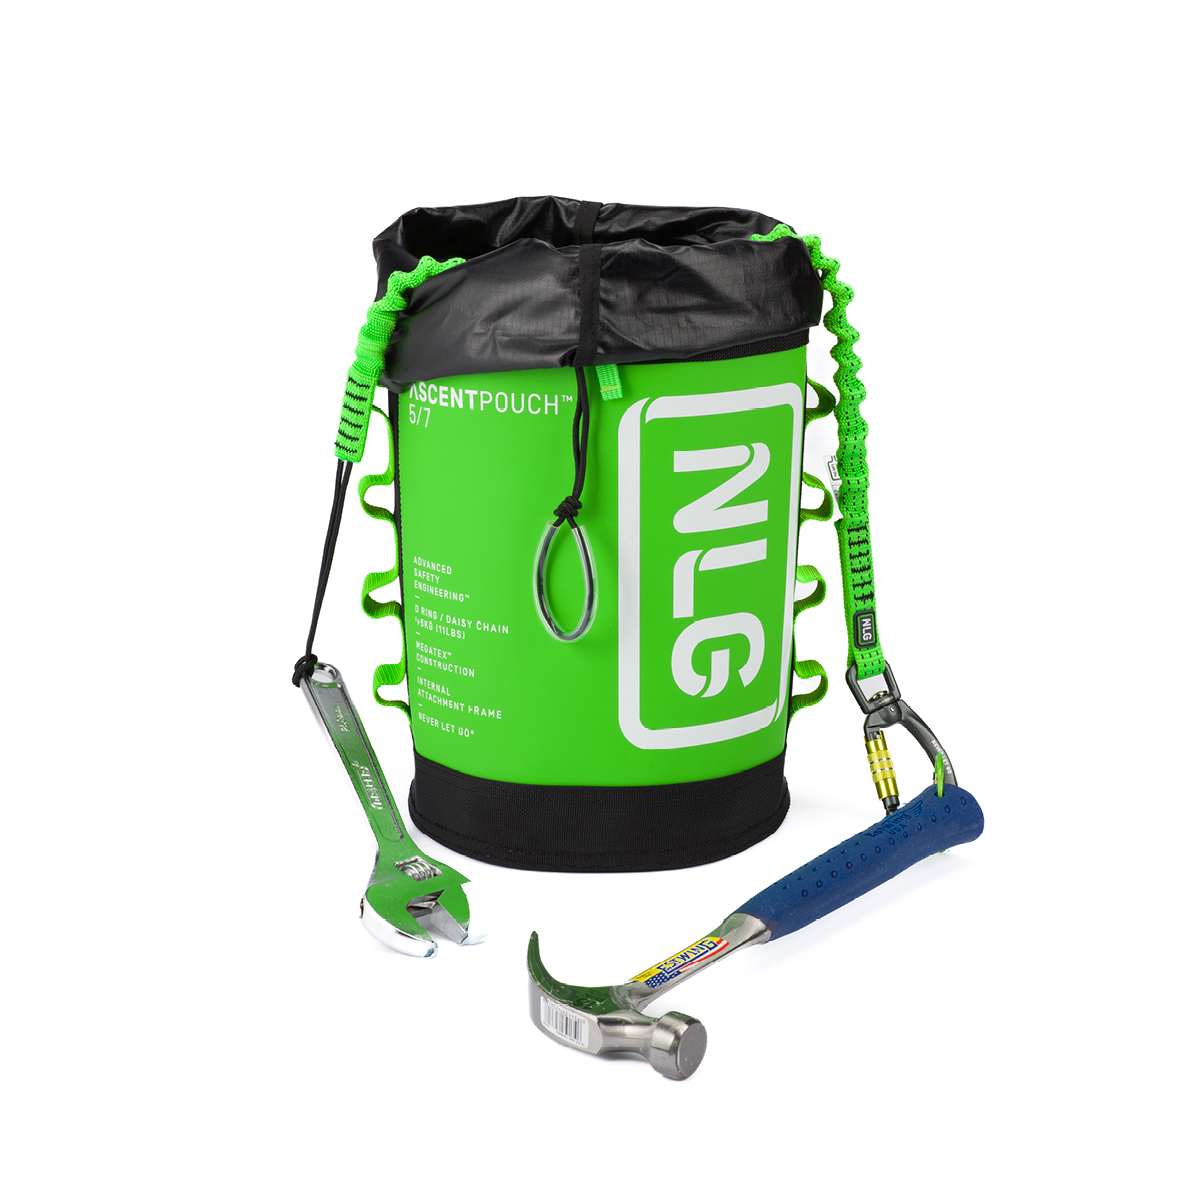 NLG Ascent Pouch from GME Supply